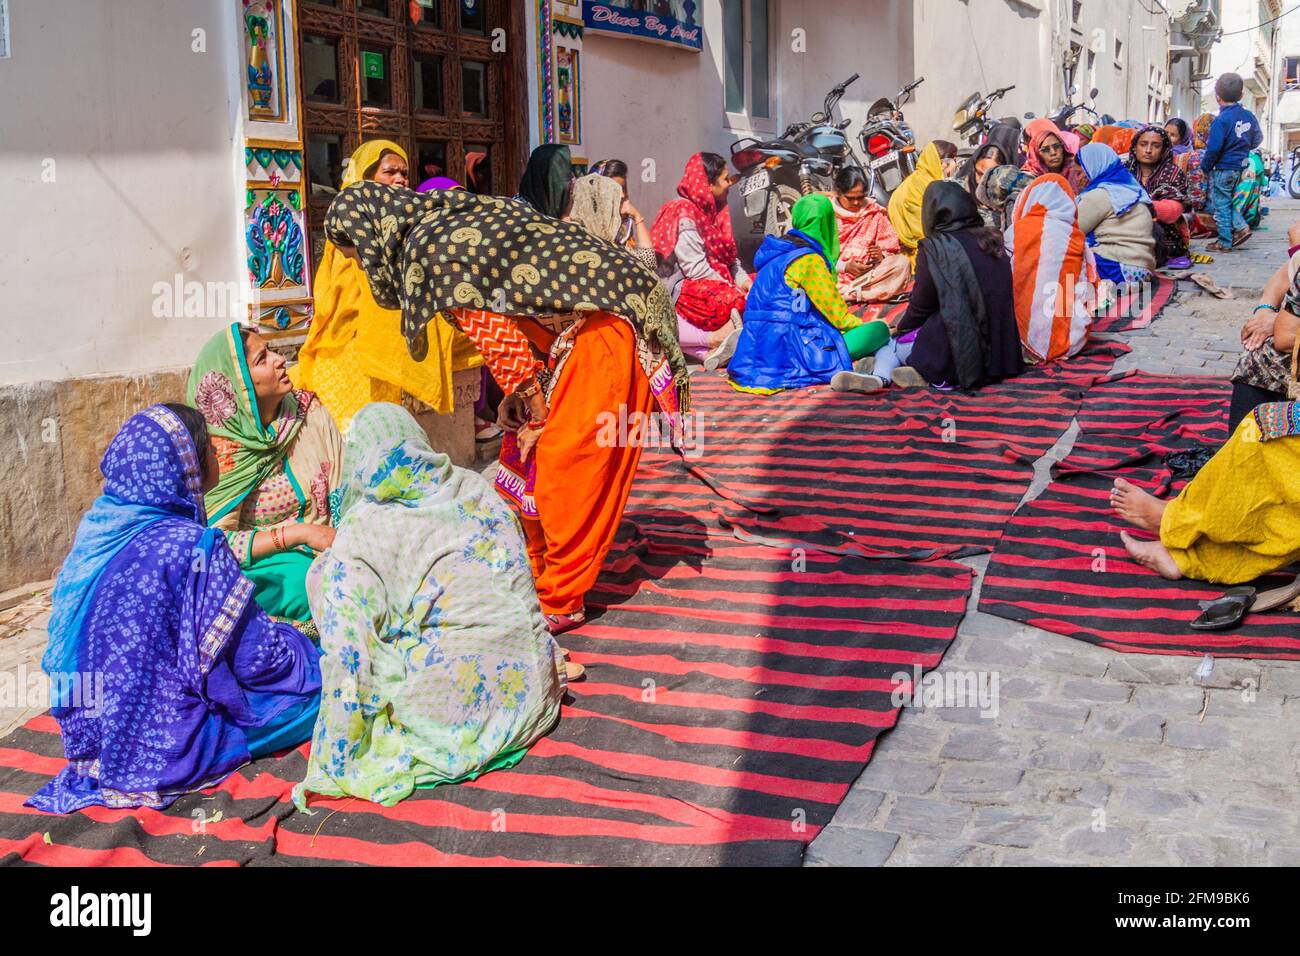 UDAIPUR, INDIA - FEBRUARY 12, 2017: Local women sitting in an alley in Udaipur, Rajasthan state, India Stock Photo